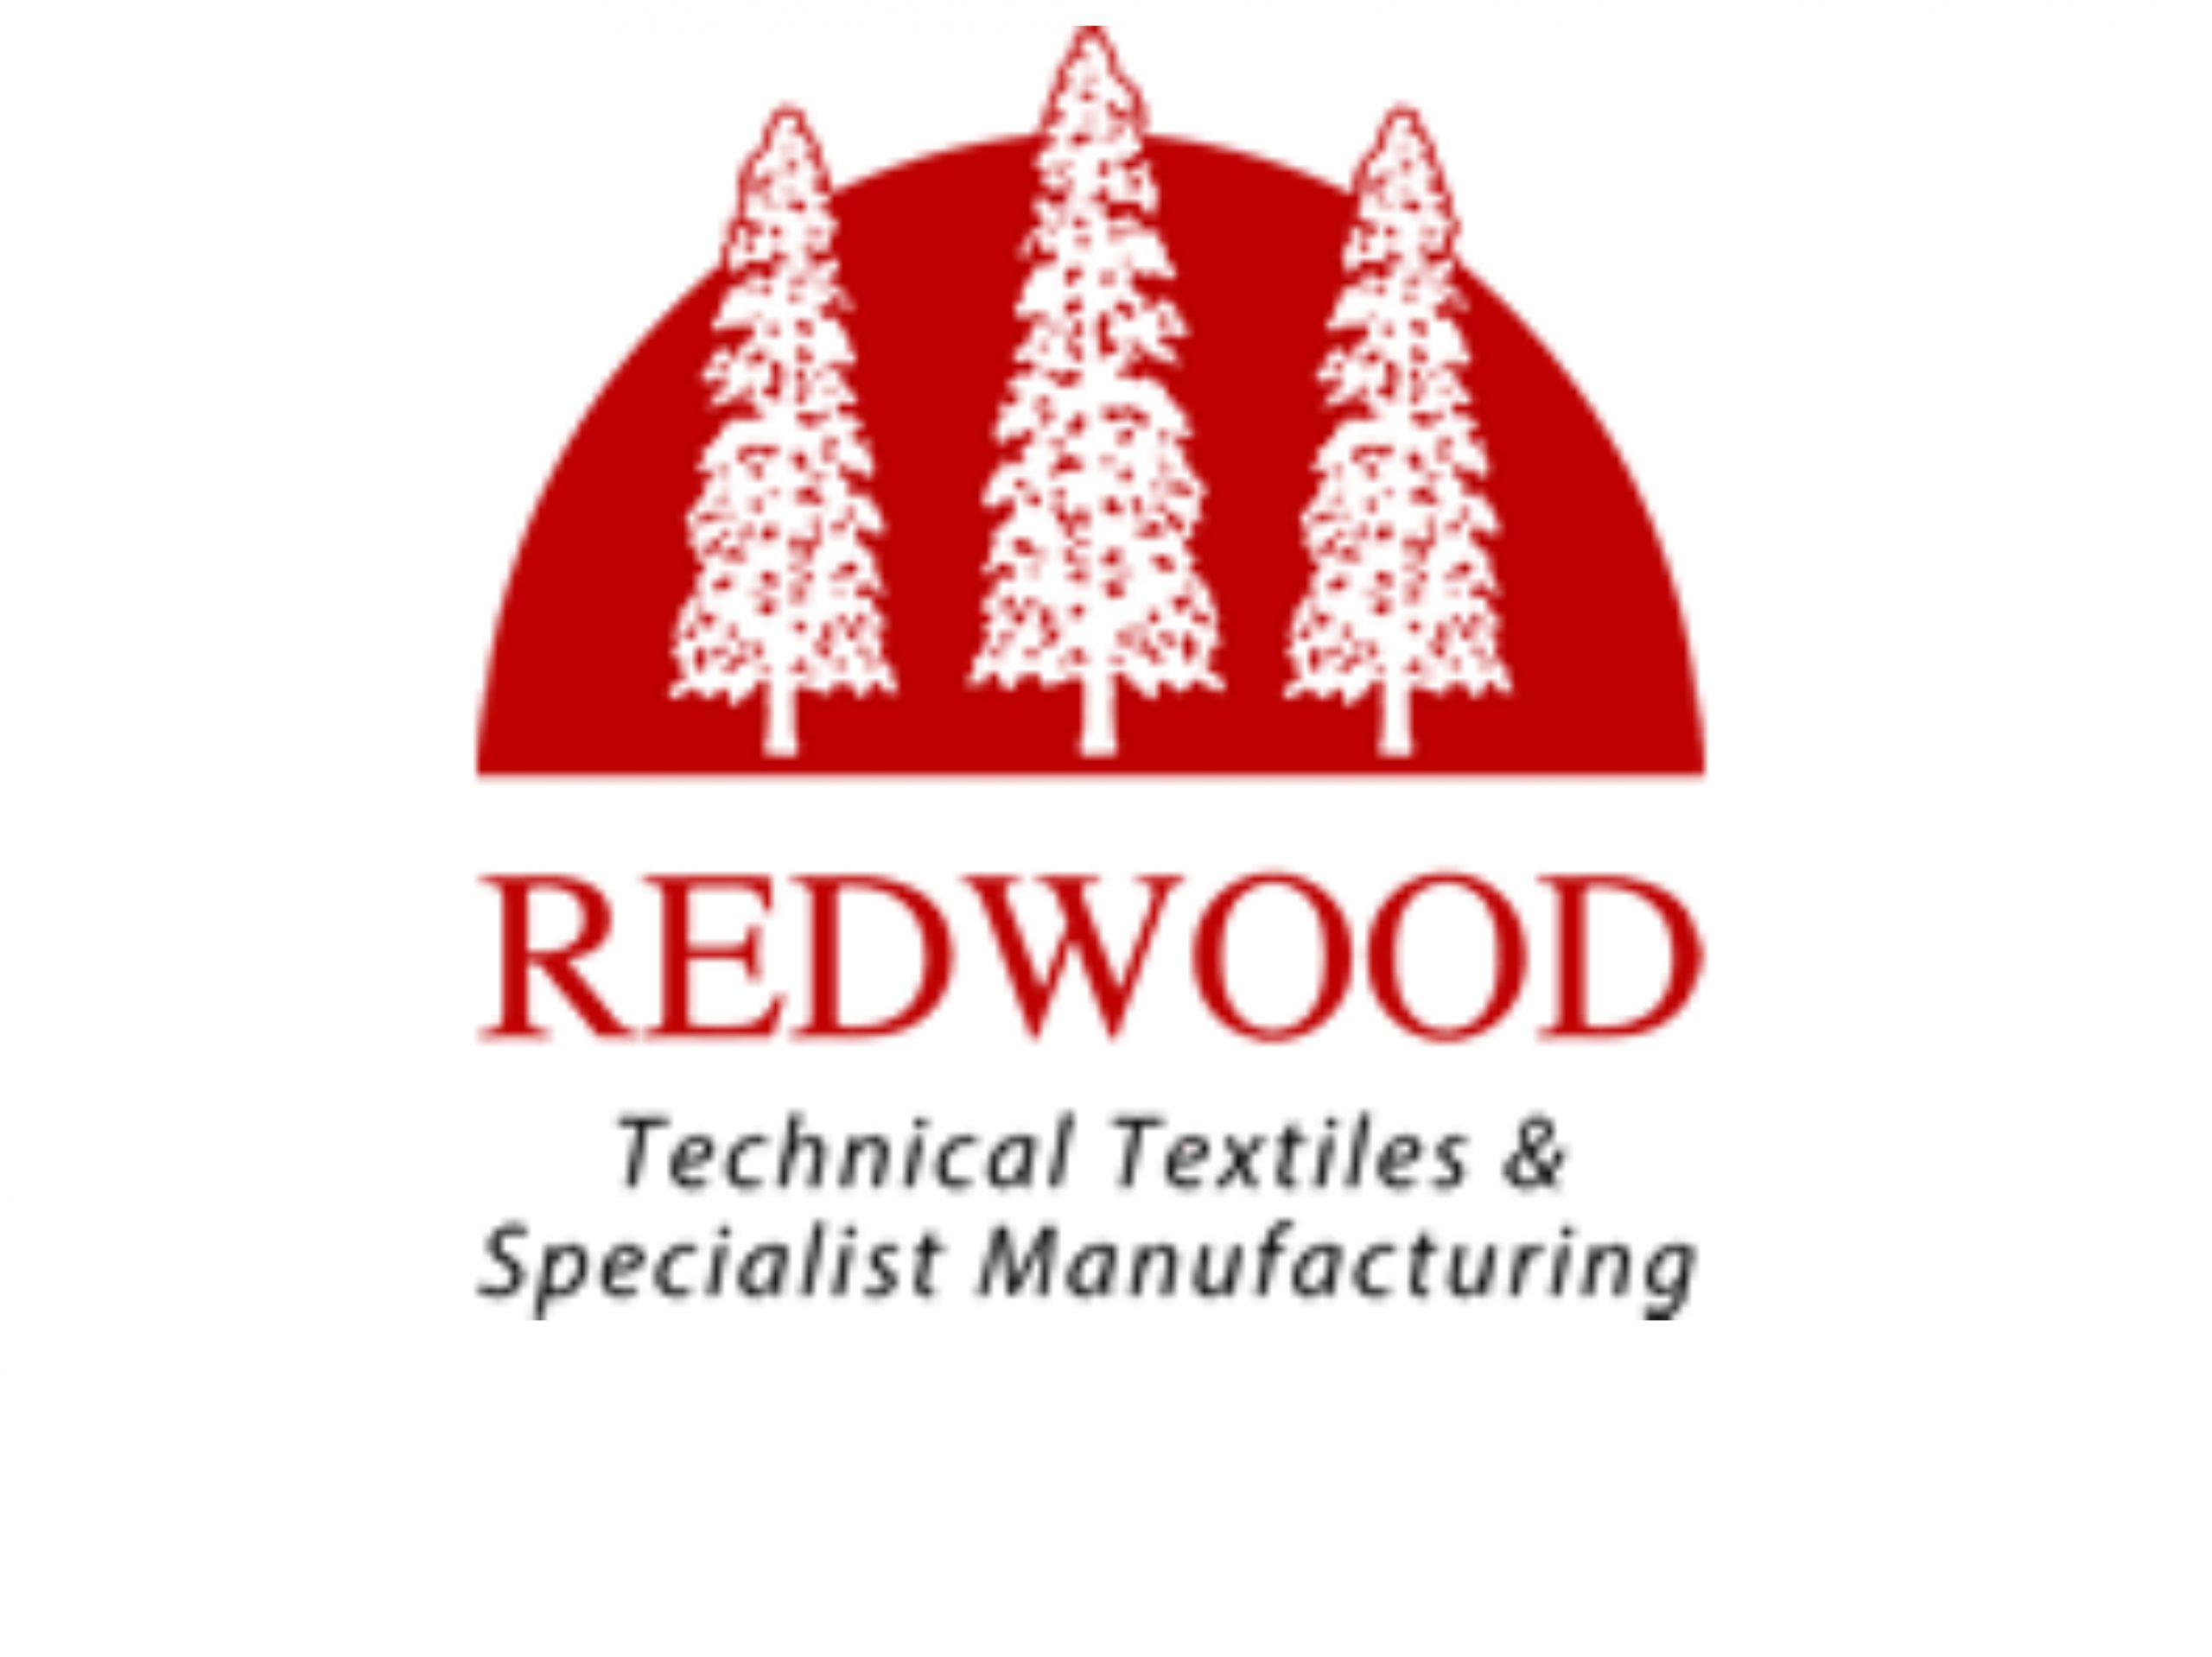 Redwood TTM Support Production of Protective Gowns for the NHS